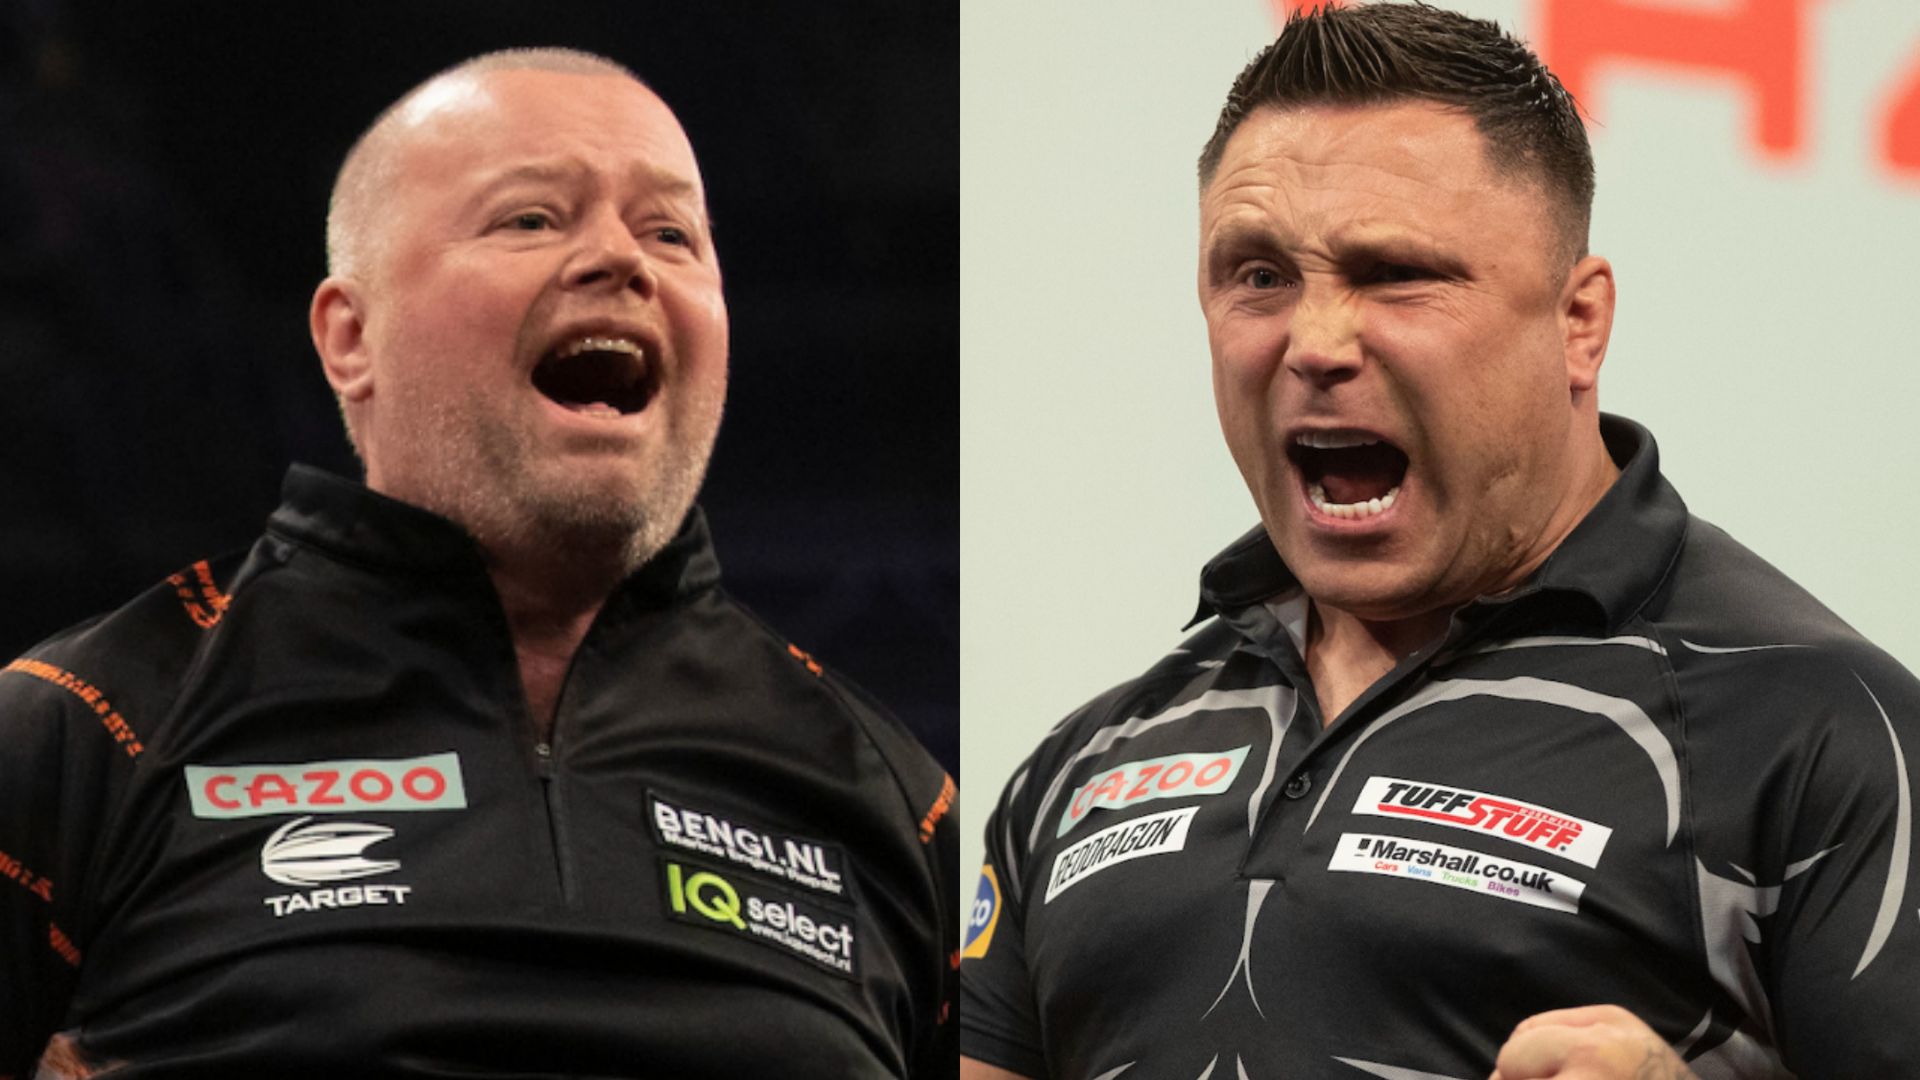 Barney and Price to meet again after dramatic night at Grand Slam of Darts